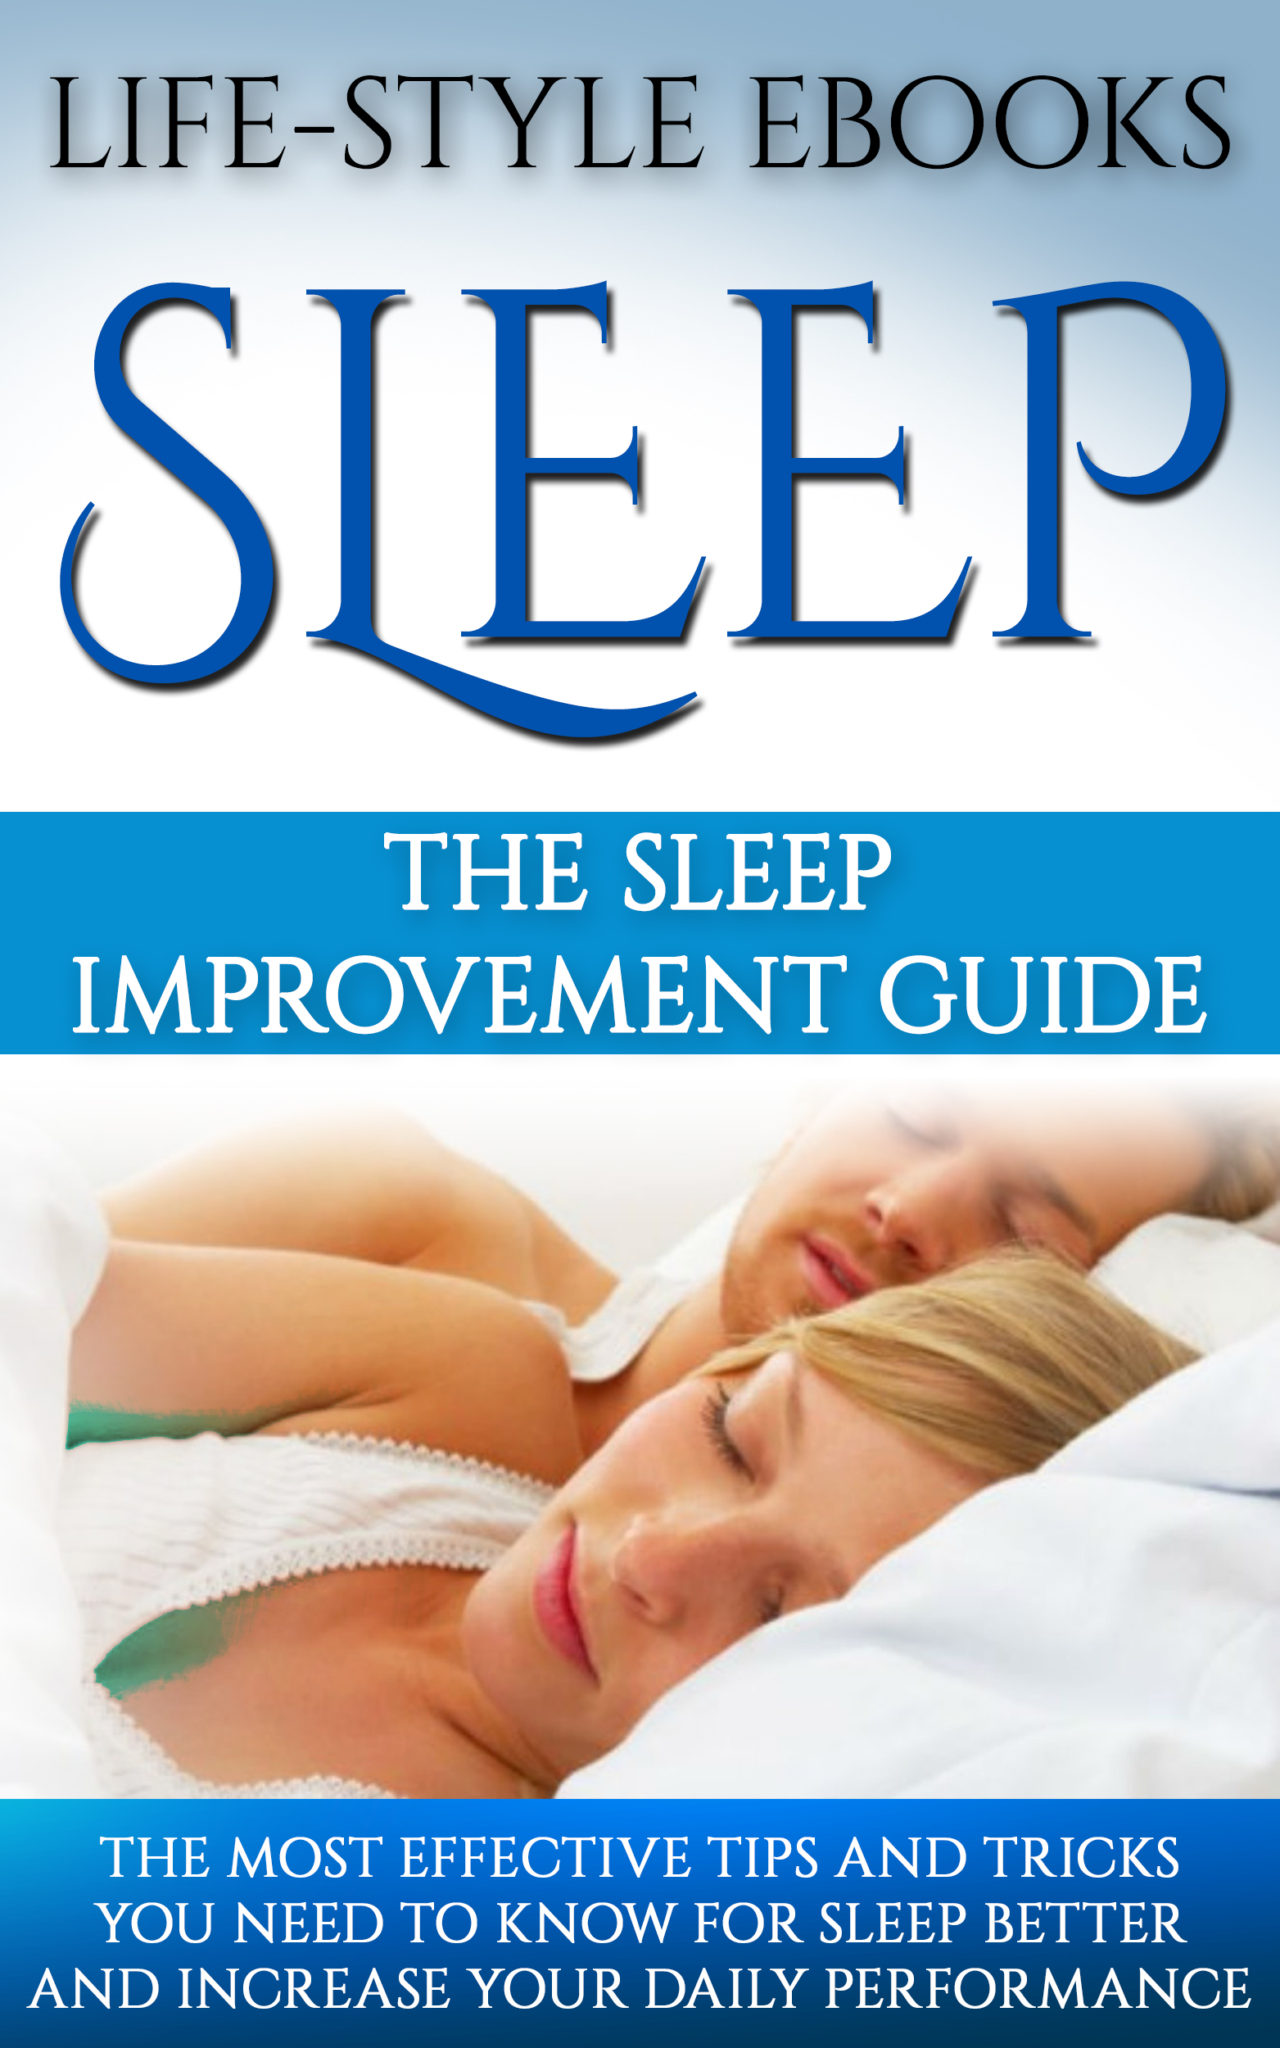 The SLEEP IMPROVEMENT Guide by LIFE-STYLE EBOOKS